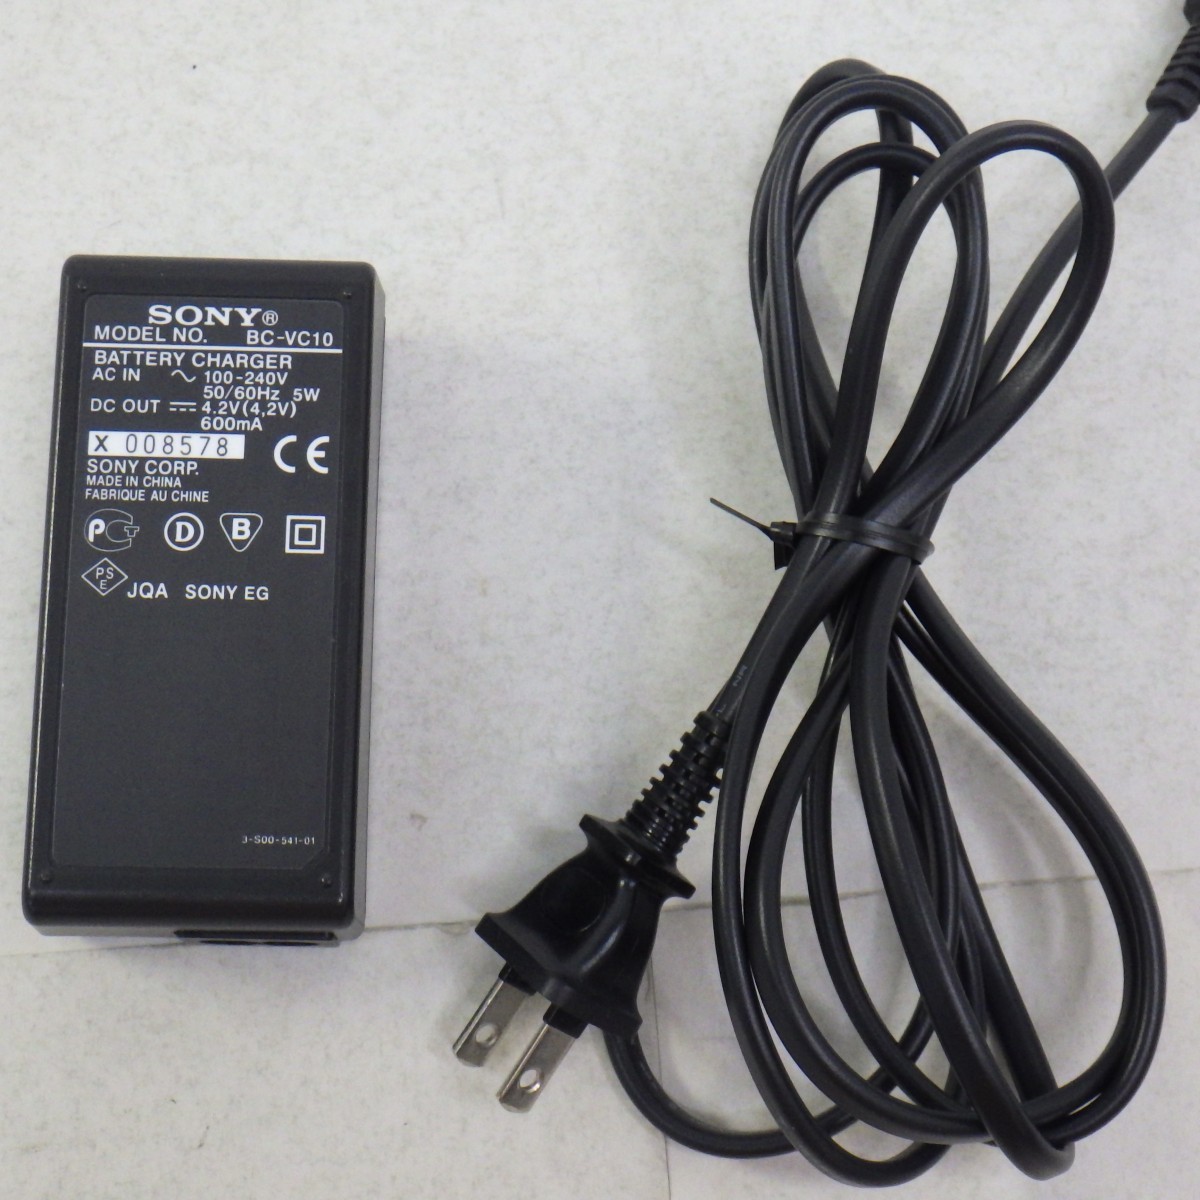 SONY original battery charger BC-VC10/ Sony battery charger / operation not yet verification Junk P